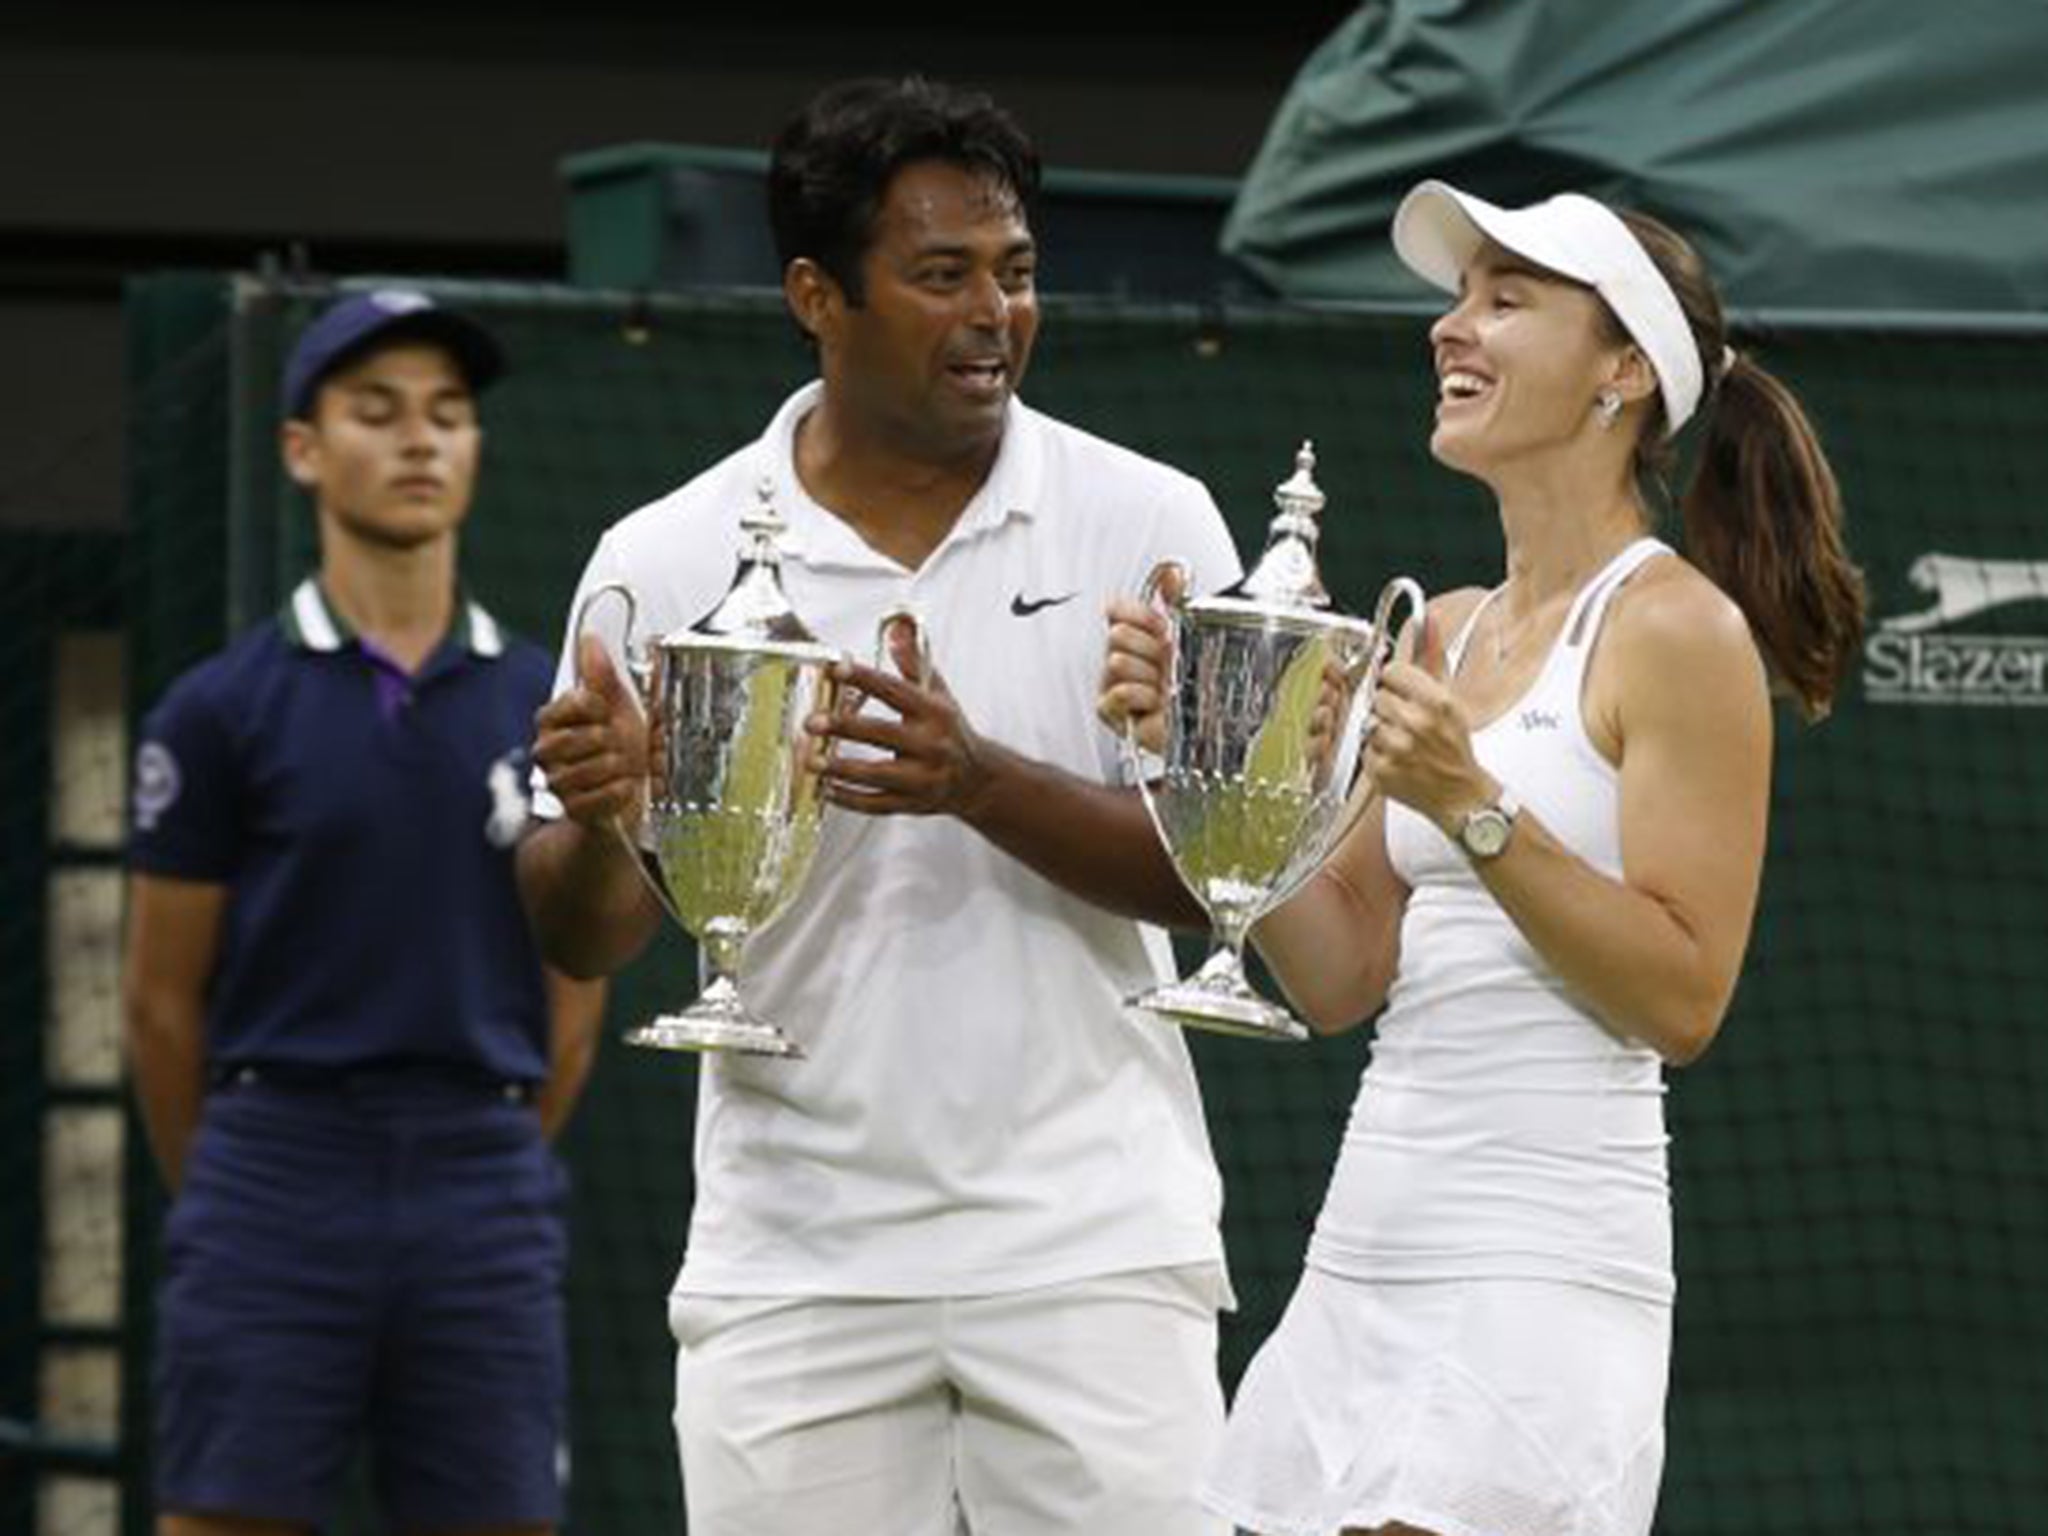 Wimbledon 2015 Reborn Martina Hingis Rolls Back The Years To Claim Two Titles In Two Days The